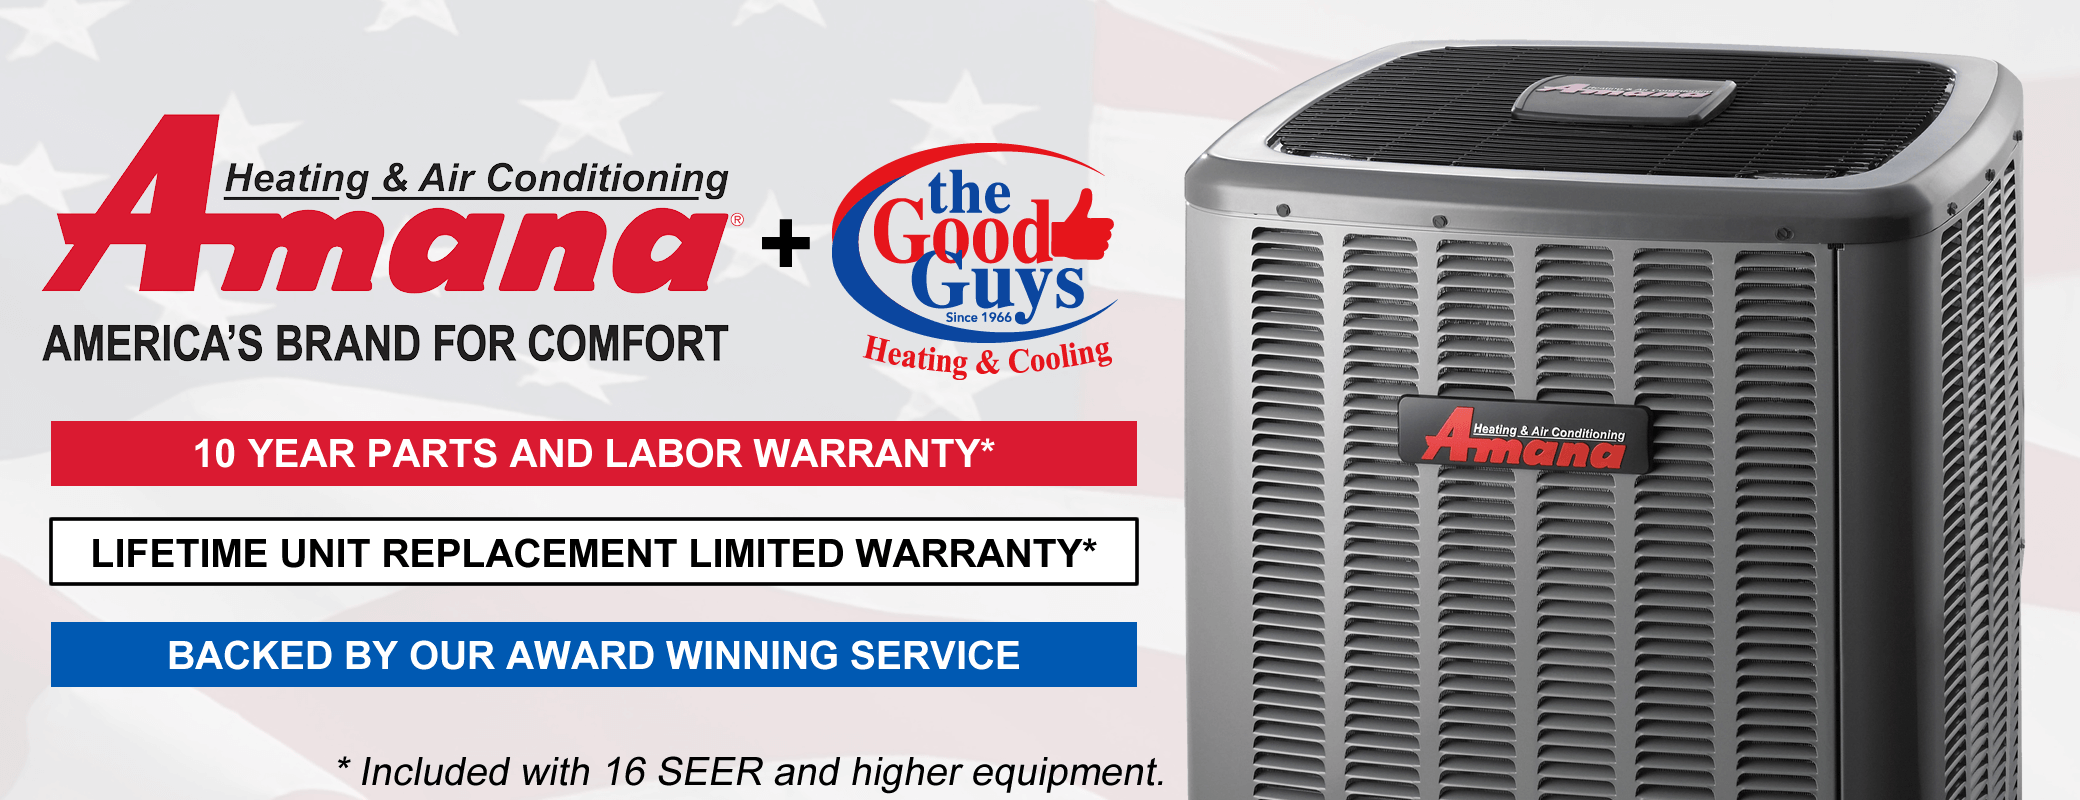 Amana and The Good Guys Heating & Cooling. Together you can't loose. 10 Year Parts & Labor standard with 16+ SEER Equipment, Lifetime Unit Replacement Limited Warranty with 16+ SEER Equipment, and the award winning Good Guys service team backing it for the life of the unit.